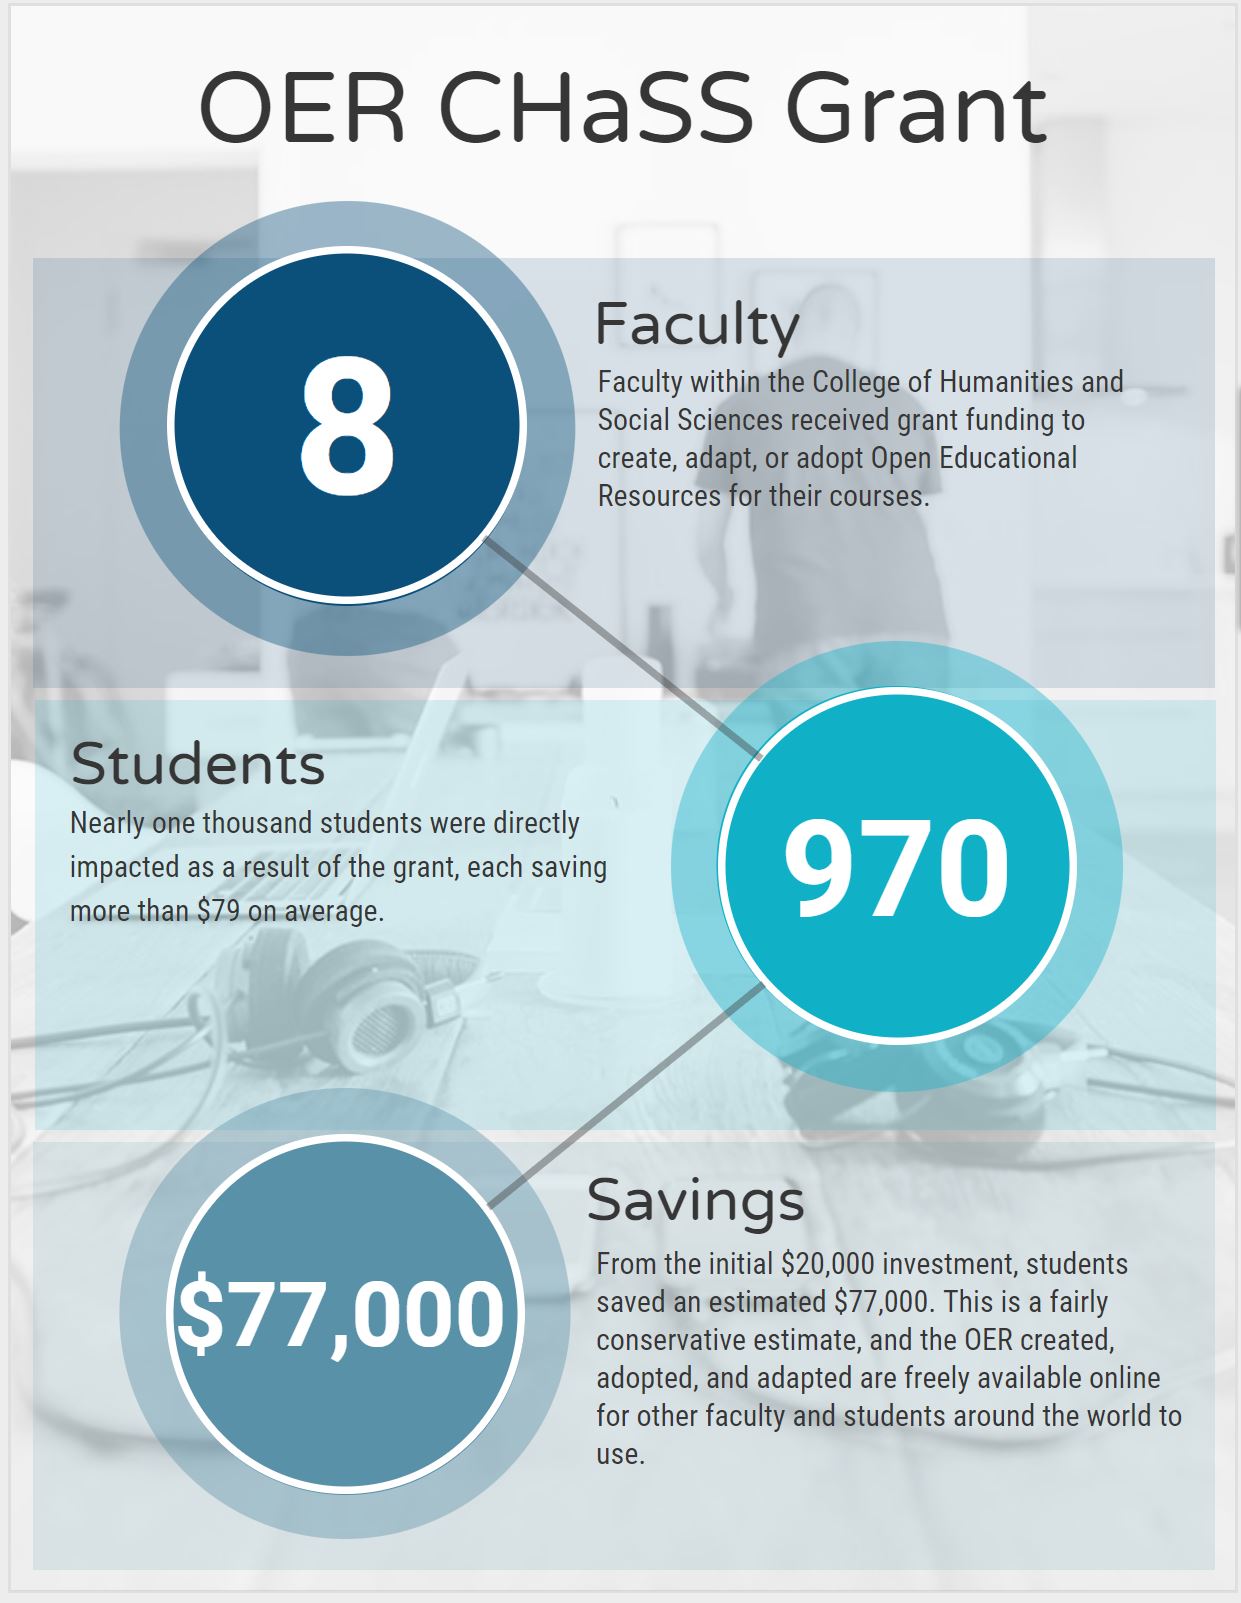 OER CHaSS Grant; 8 Faculty Members; Faculty within the College of Humanities and Social Sciences recieved grant funding to create, adapt, or adopt Open Educational Resources for their courses. 970 Students; Nearly one thousand students were directly impacted as a result of the grant, each saving more than $79 on average. $77,000 in Savings; From the initial $20,000 investment, students saved an estimated $70,000. This is a fairly conservative estimate, and the OER created, adopted, and adapted are freely available online for other faculty and students around the world to use.